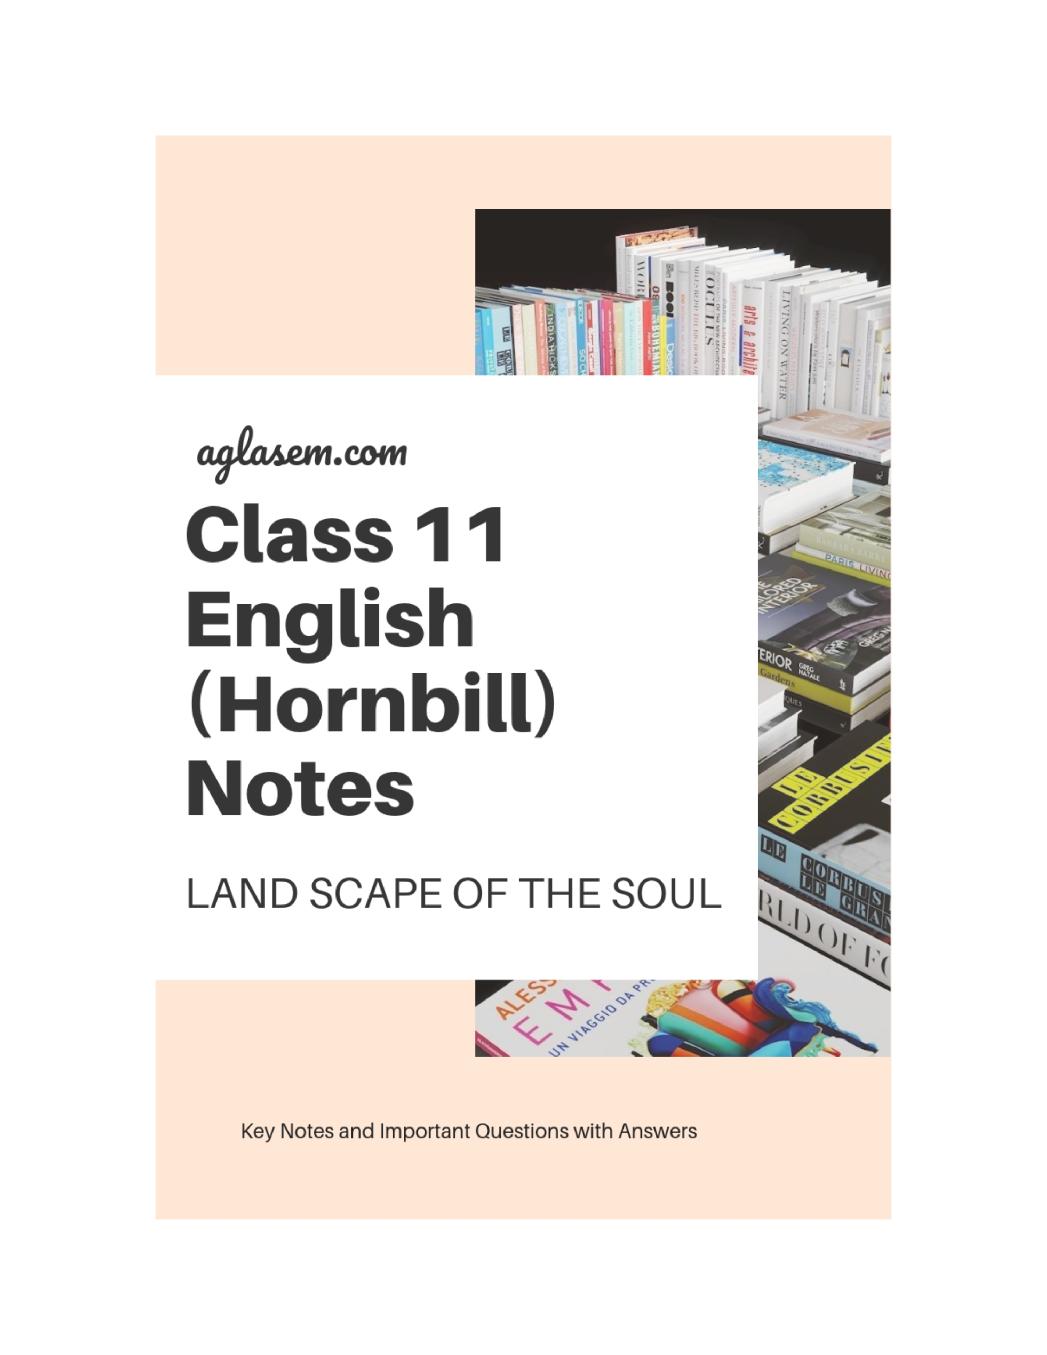 Class 11 English Hornbill Notes For Landscape of the Soul - Page 1